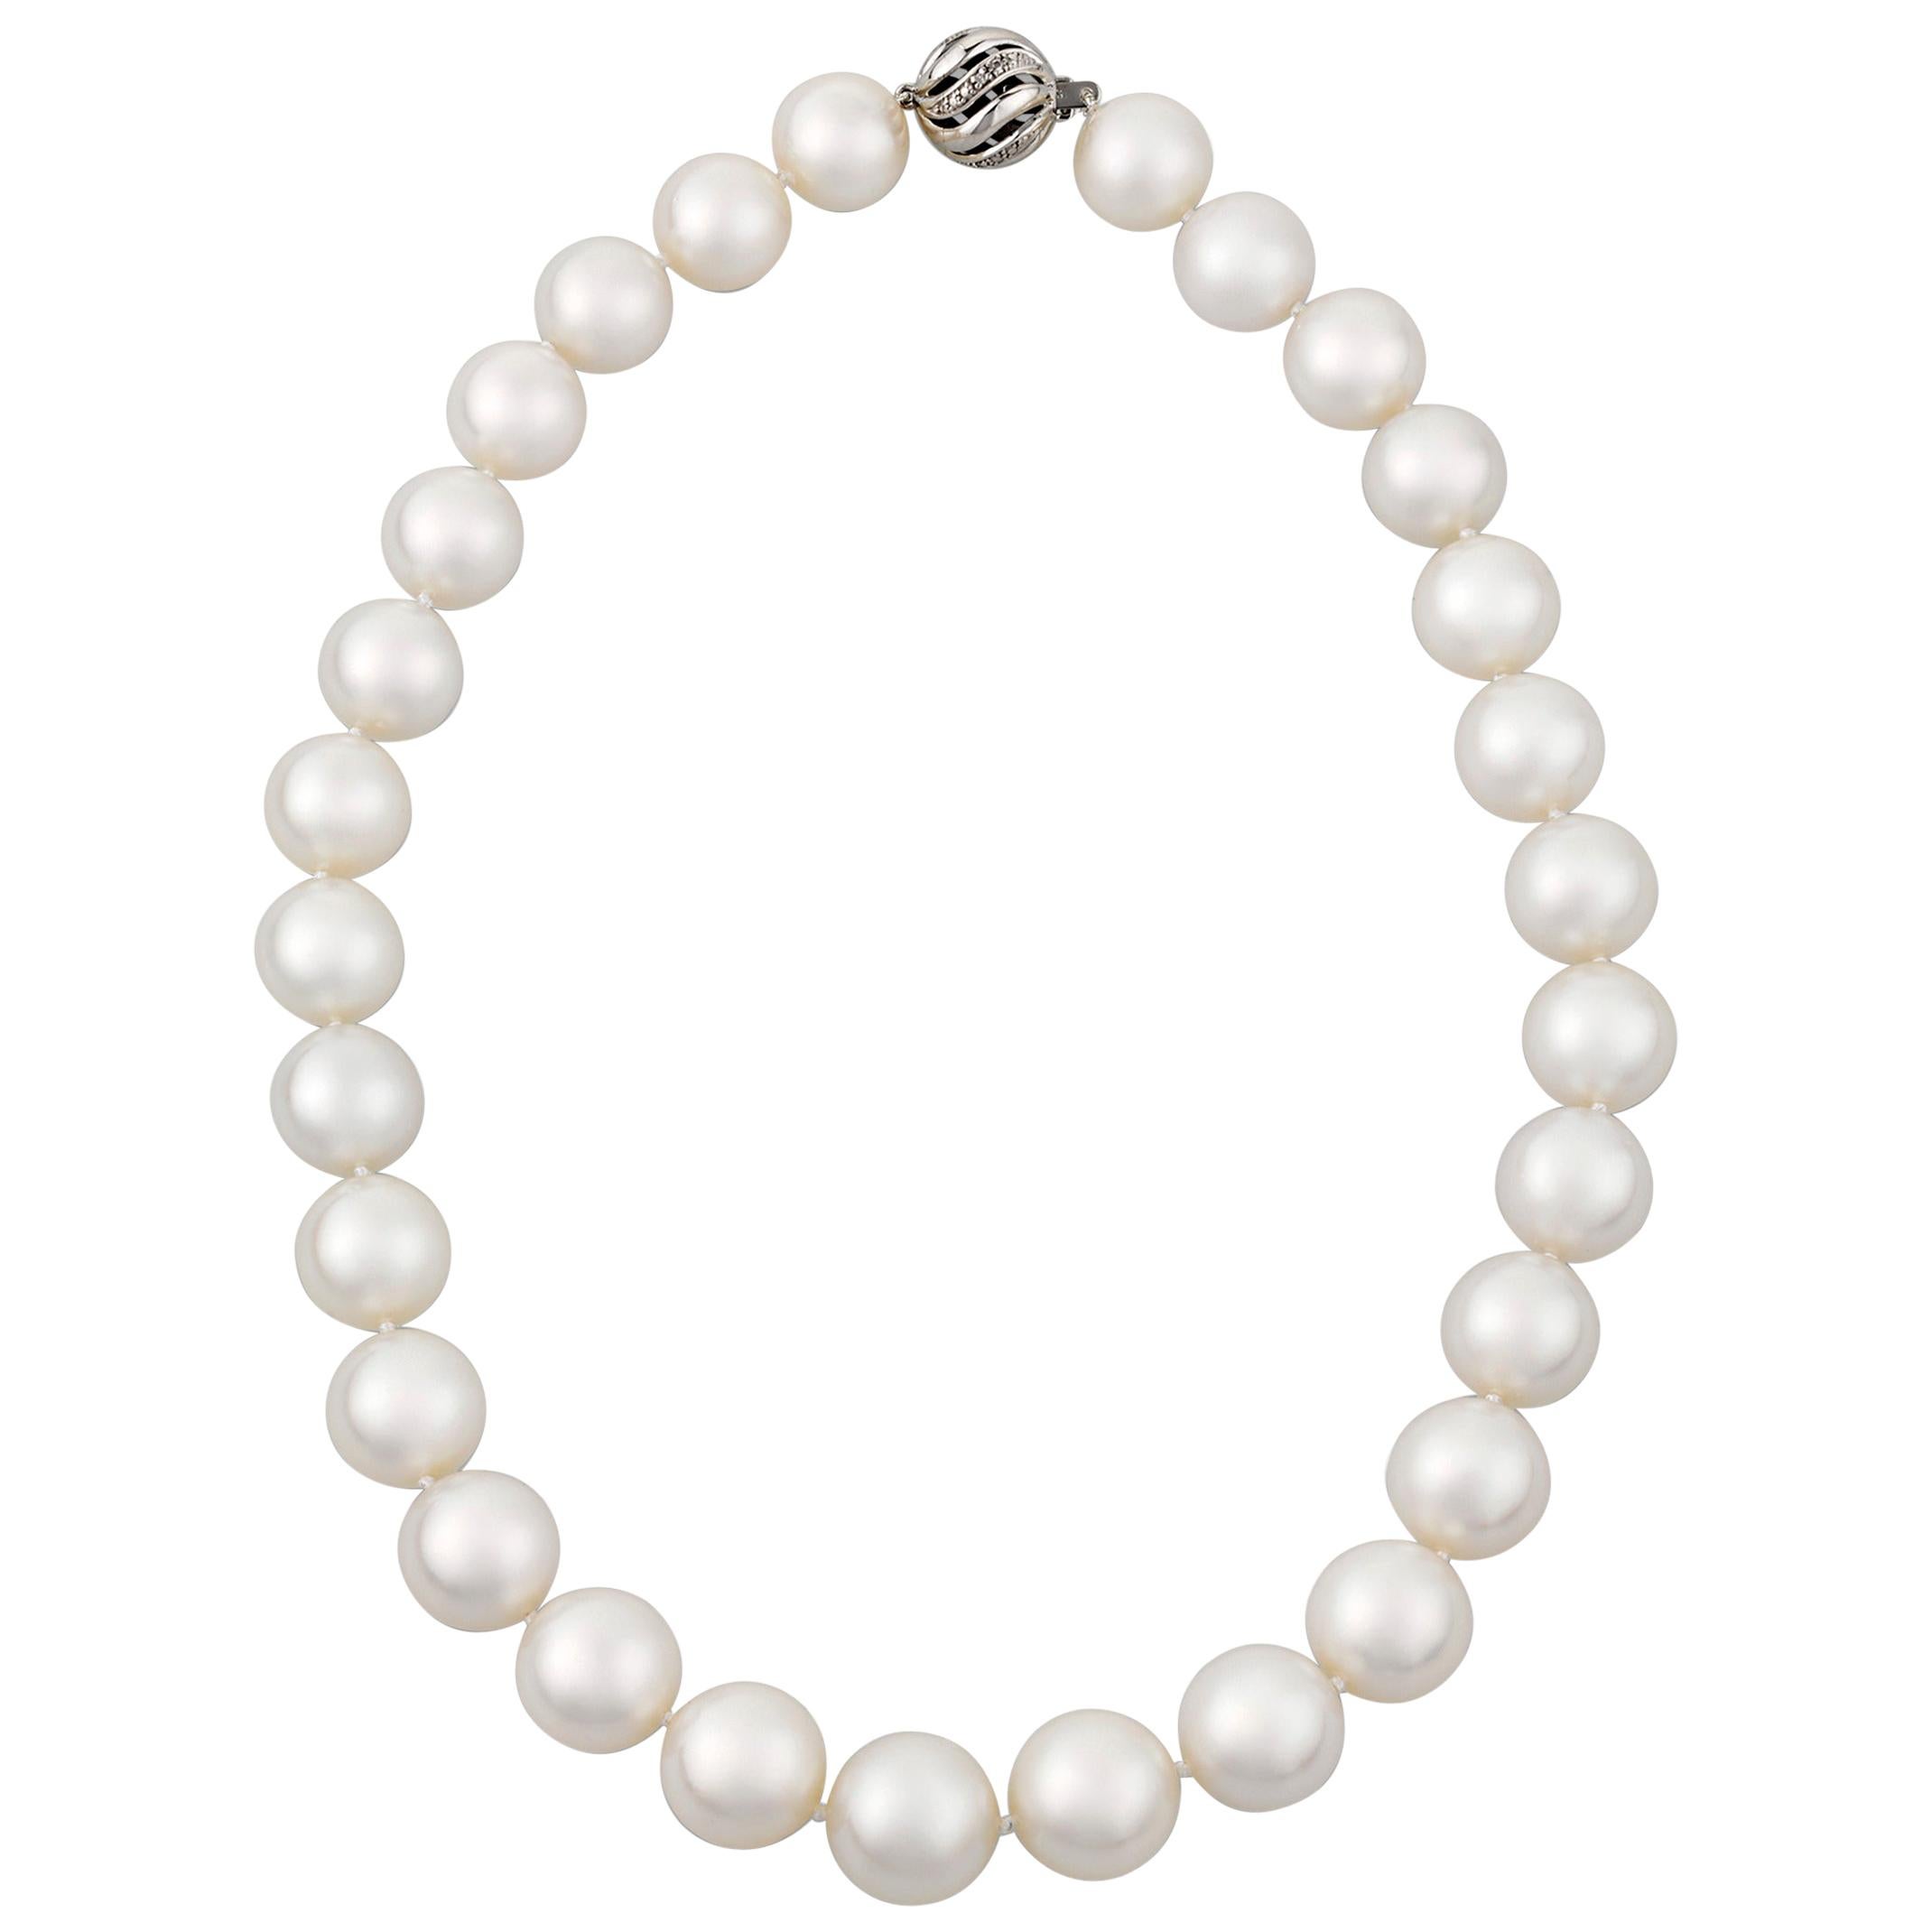 13mm to 15mm White South Sea Pearl Necklace 